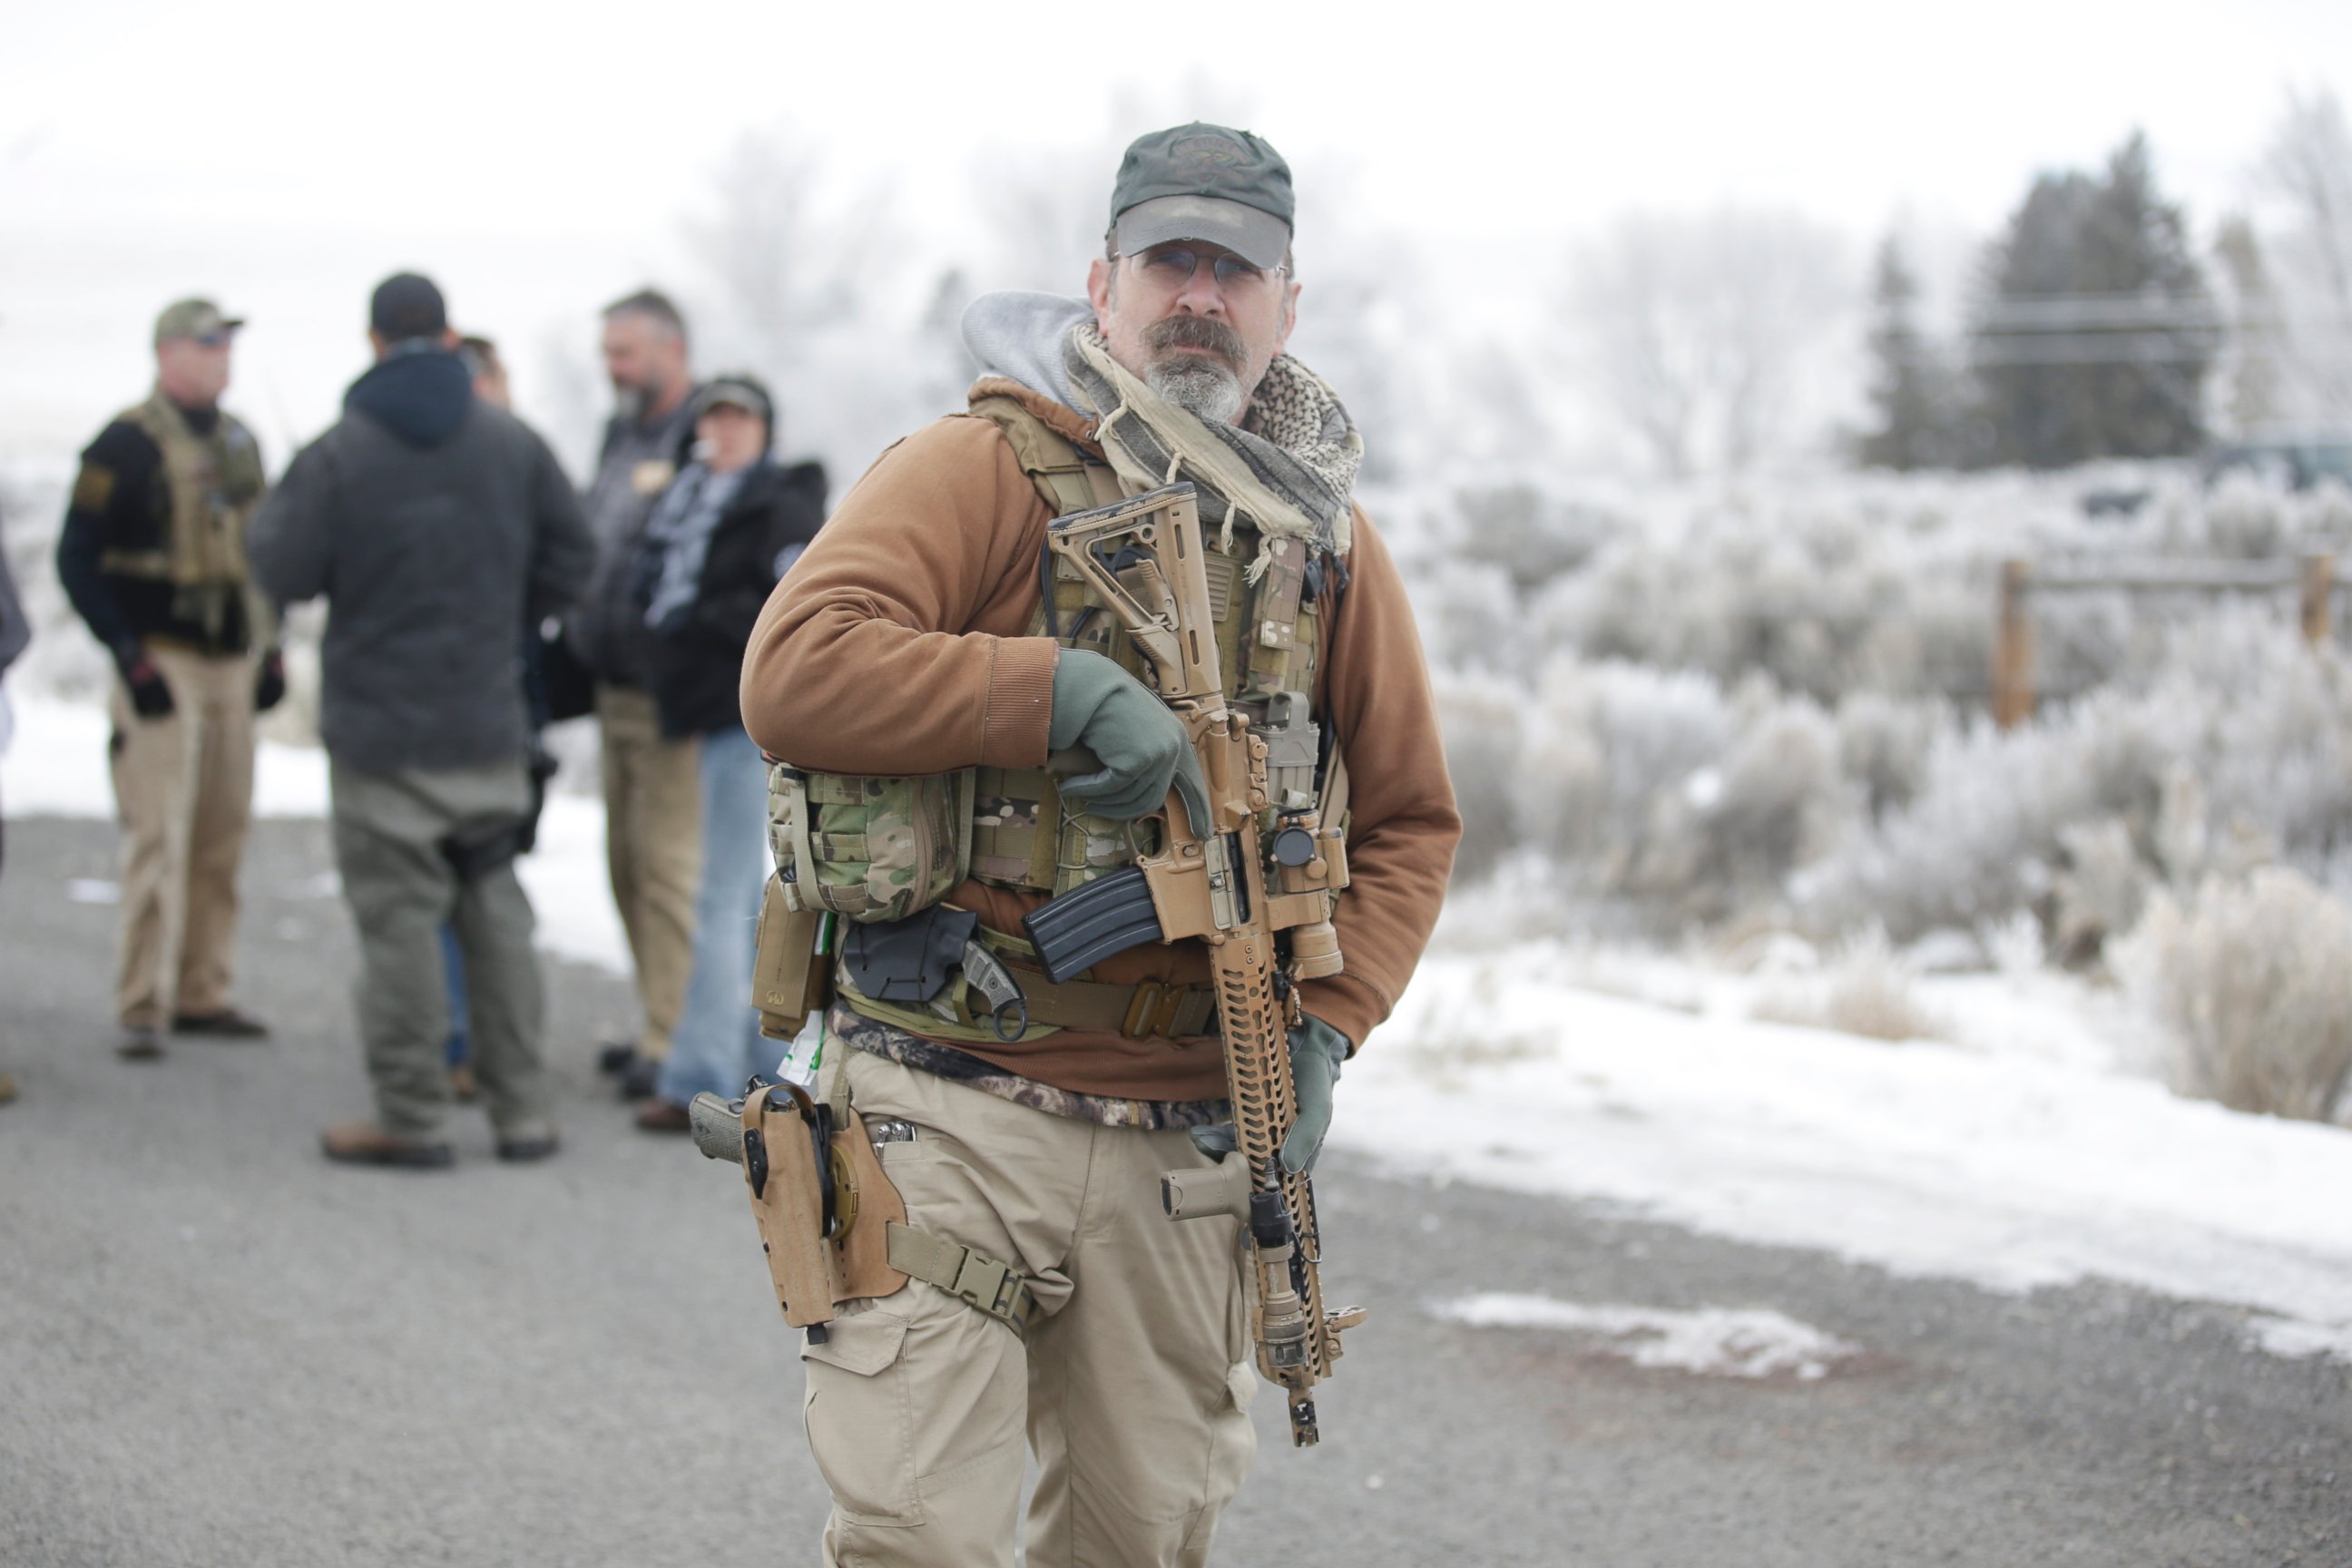 PHOTO: A man stands guard after members of the "3% of Idaho" group along with several other organizations arrived at the Malheur National Wildlife Refuge near Burns, Ore., on Saturday, Jan. 9, 2016.